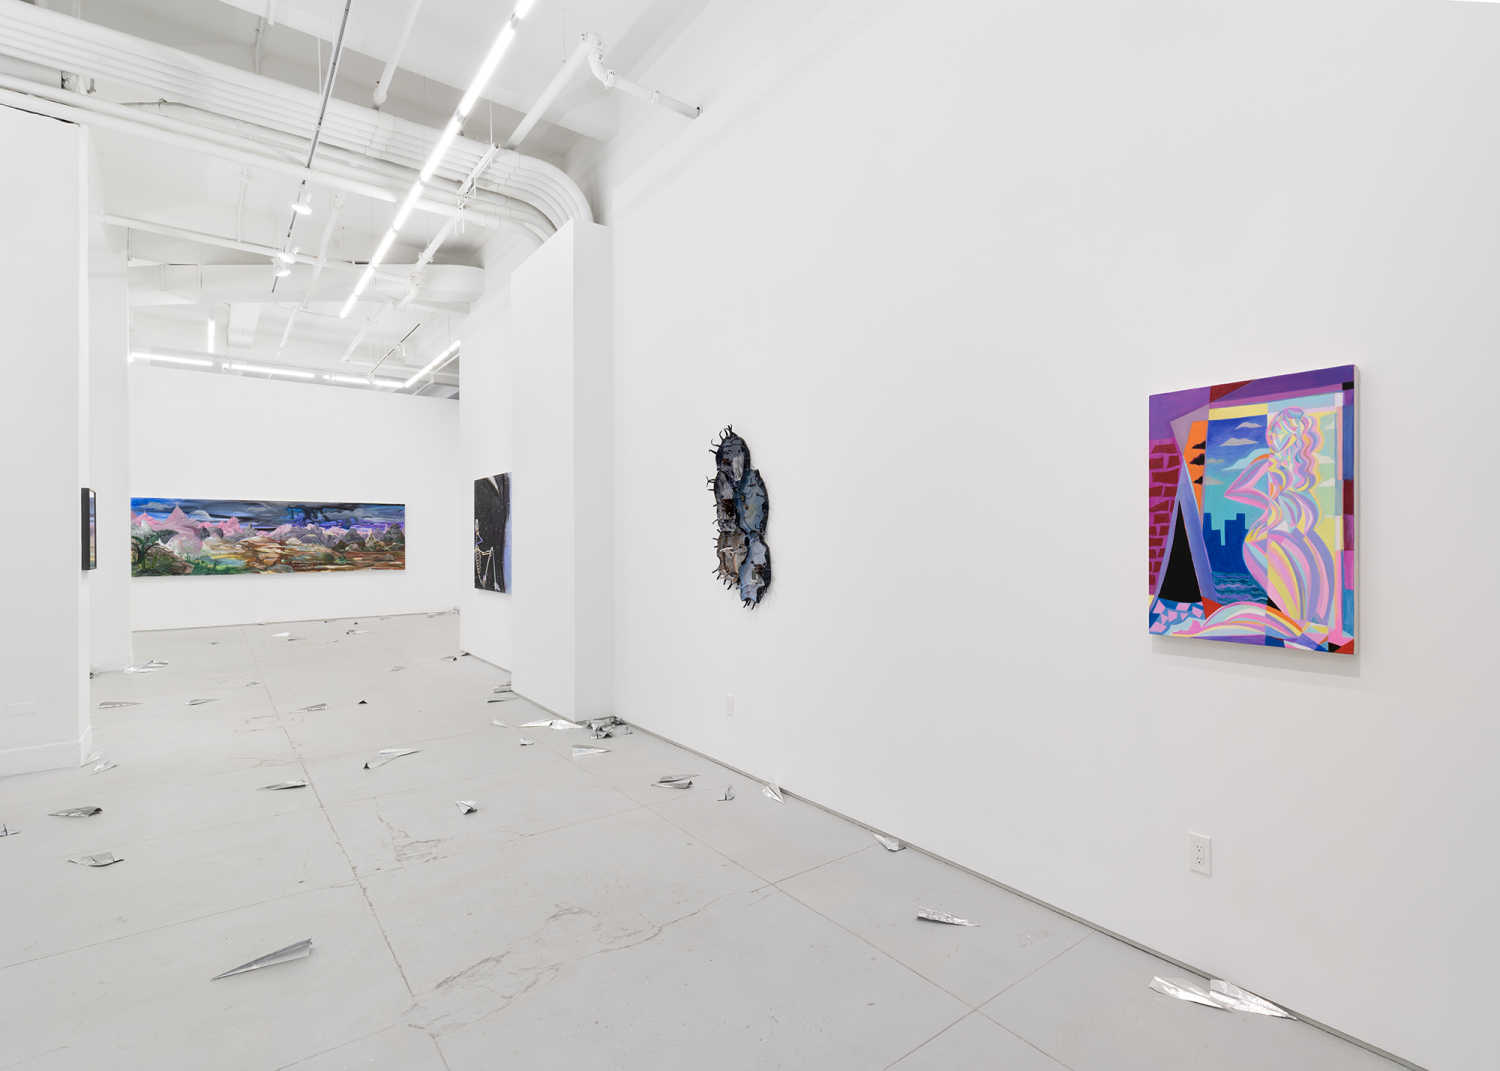 Installation view of 3.0, the inaugural exhibition at Chapter NY's new home in Tribeca, New York, designed by Bureau V, photography by Charles Benton.